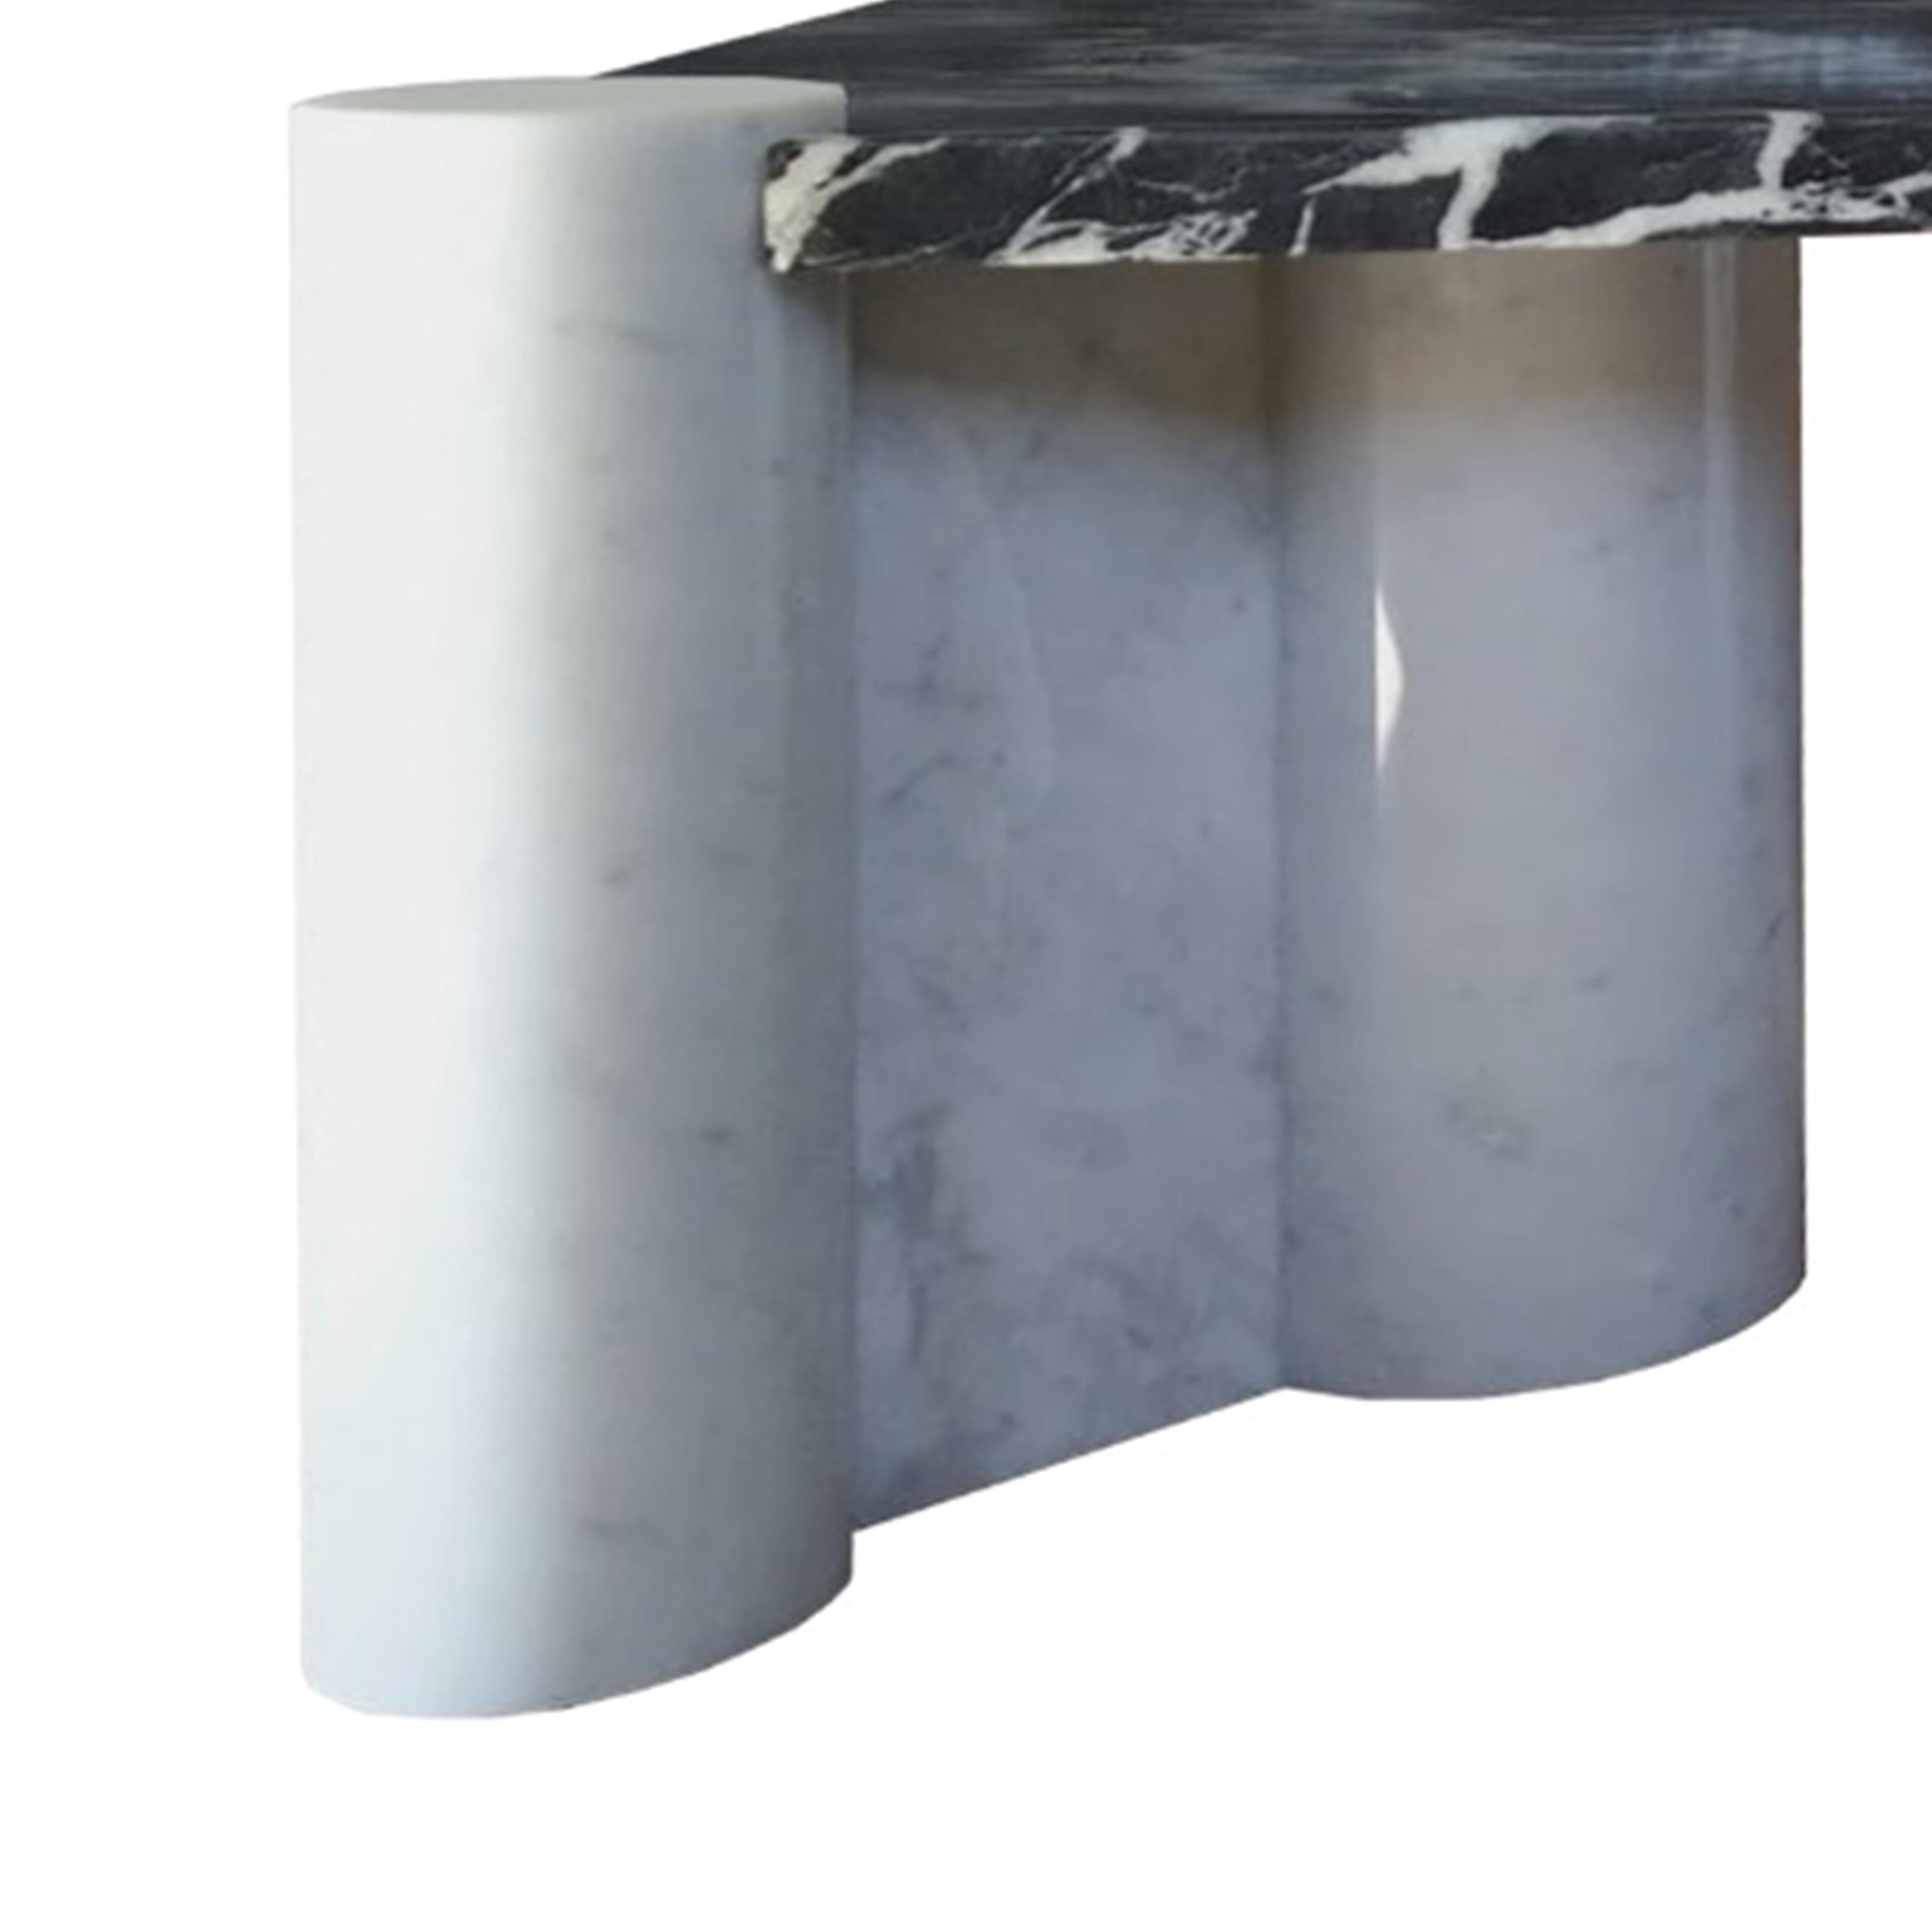 Mid-Century Modern Gae Aulenti Space Age Marble Jumbo Coffee Table for Knoll International, 1969 For Sale